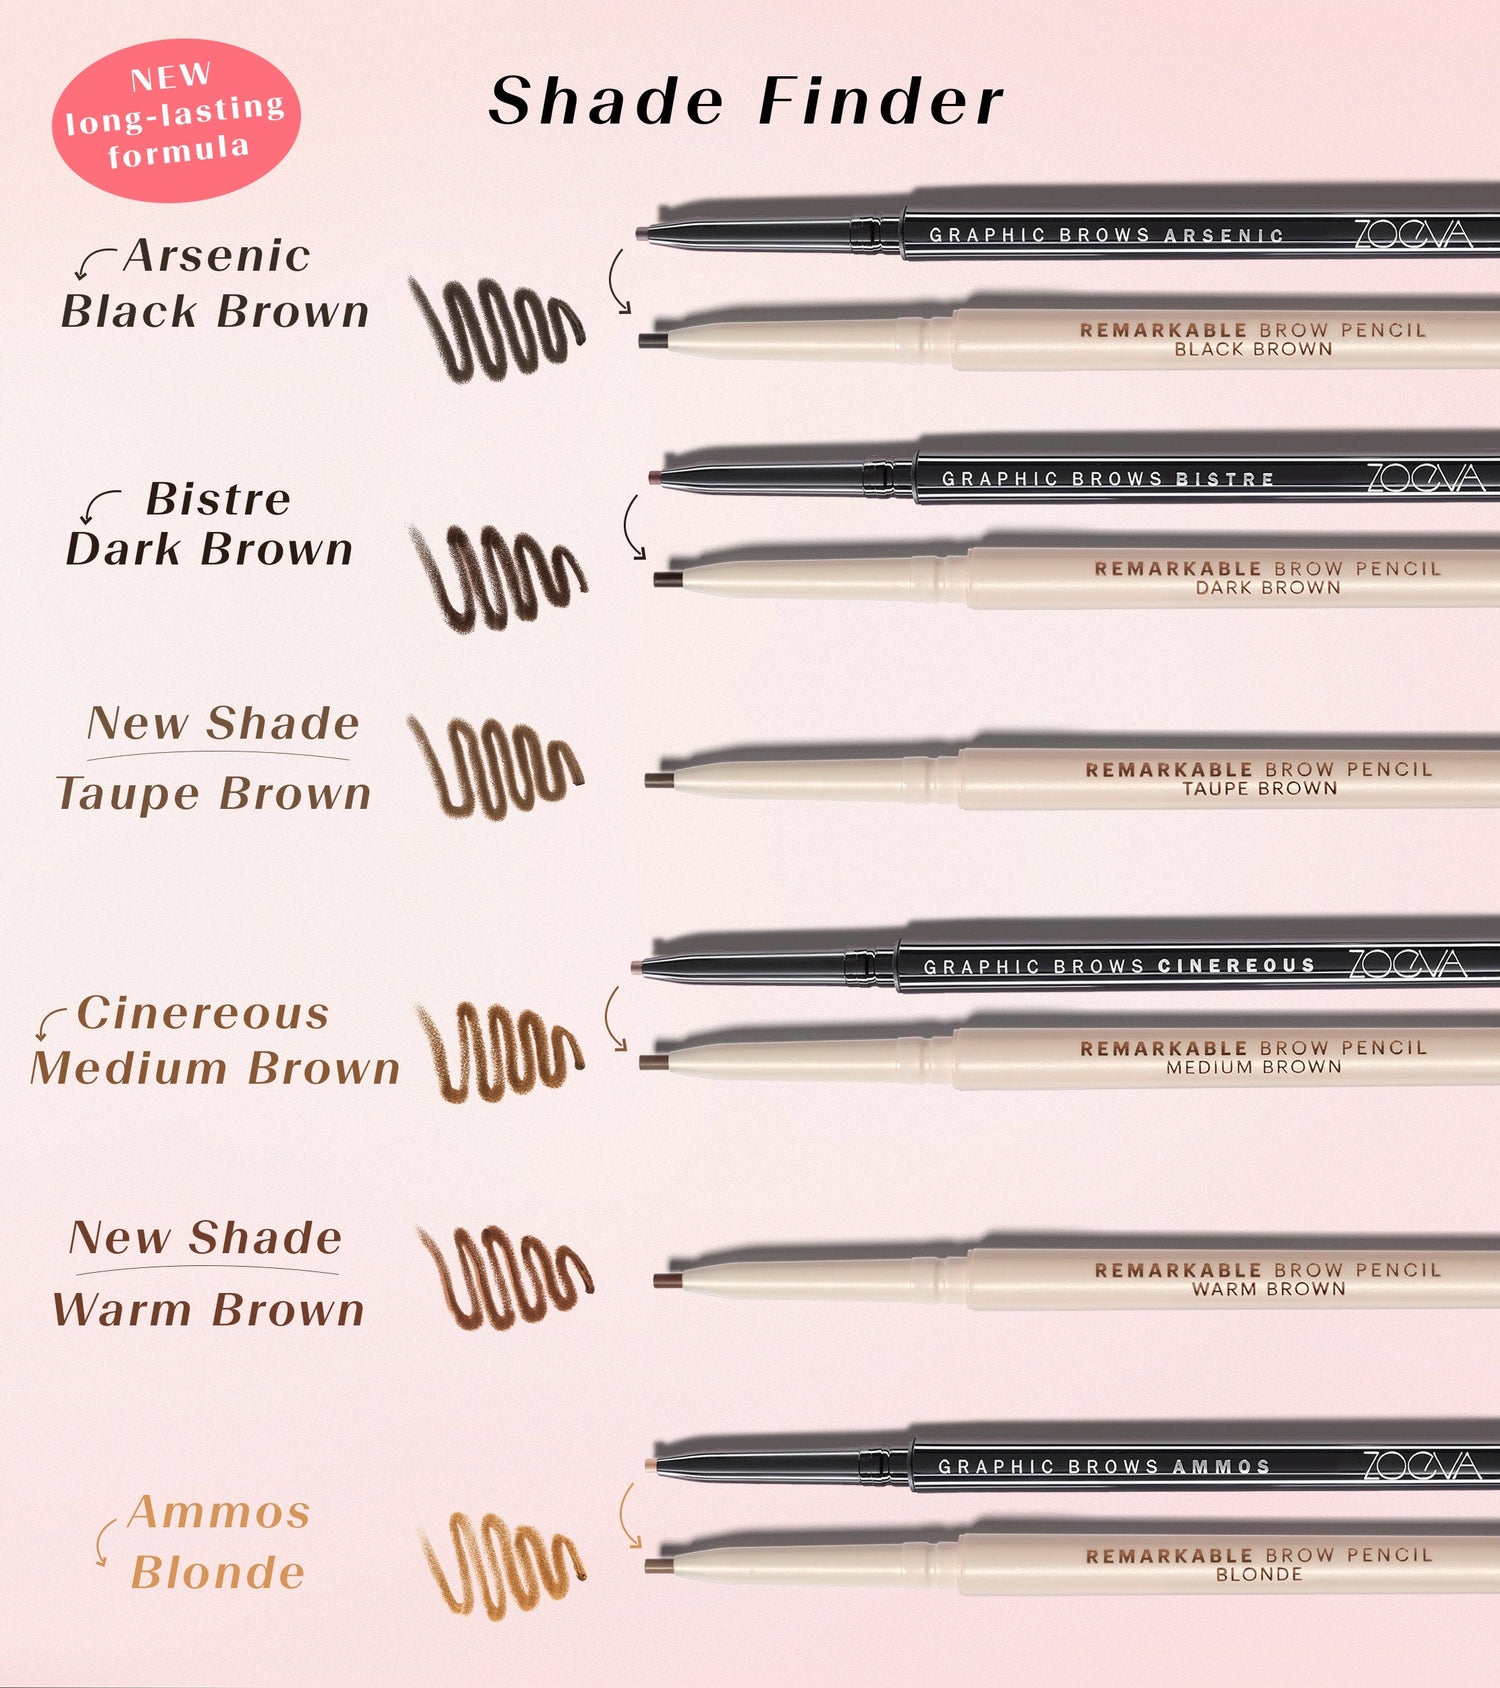 REMARKABLE BROW PENCIL